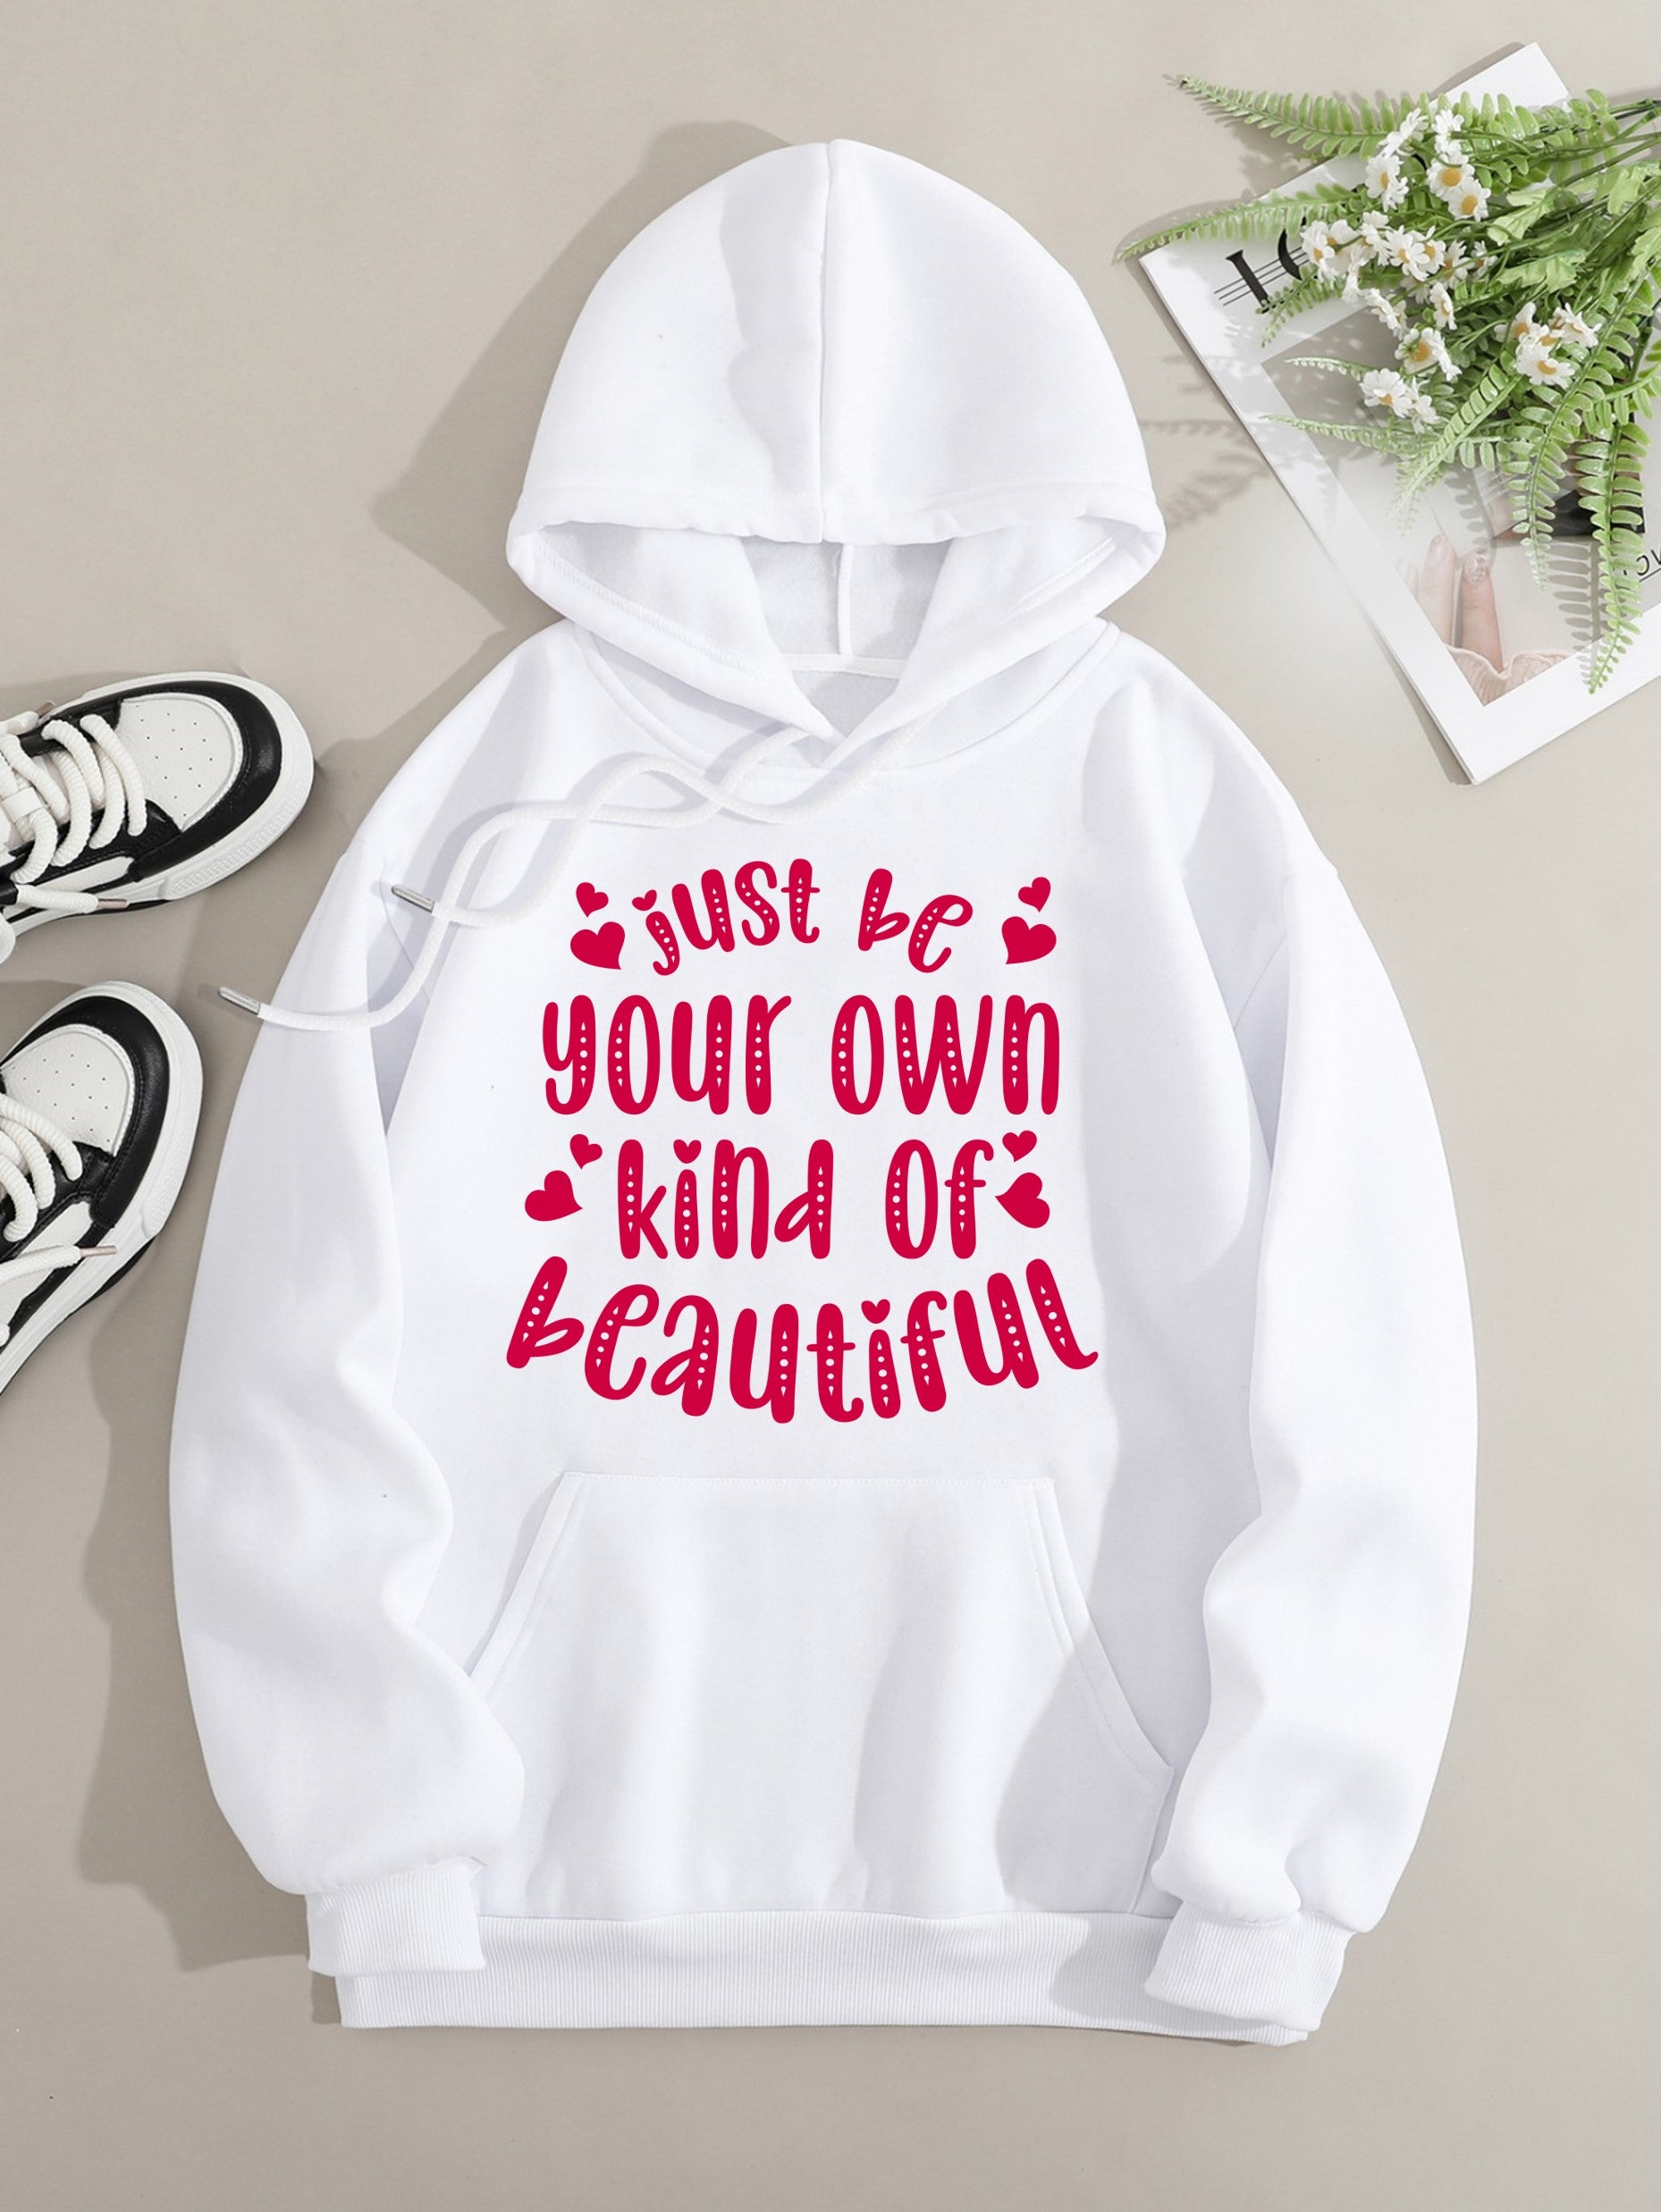 Printed on front Kangaroo Pocket Hoodie Long Sleeve for Women Pattern Just be your own kind of beautiful